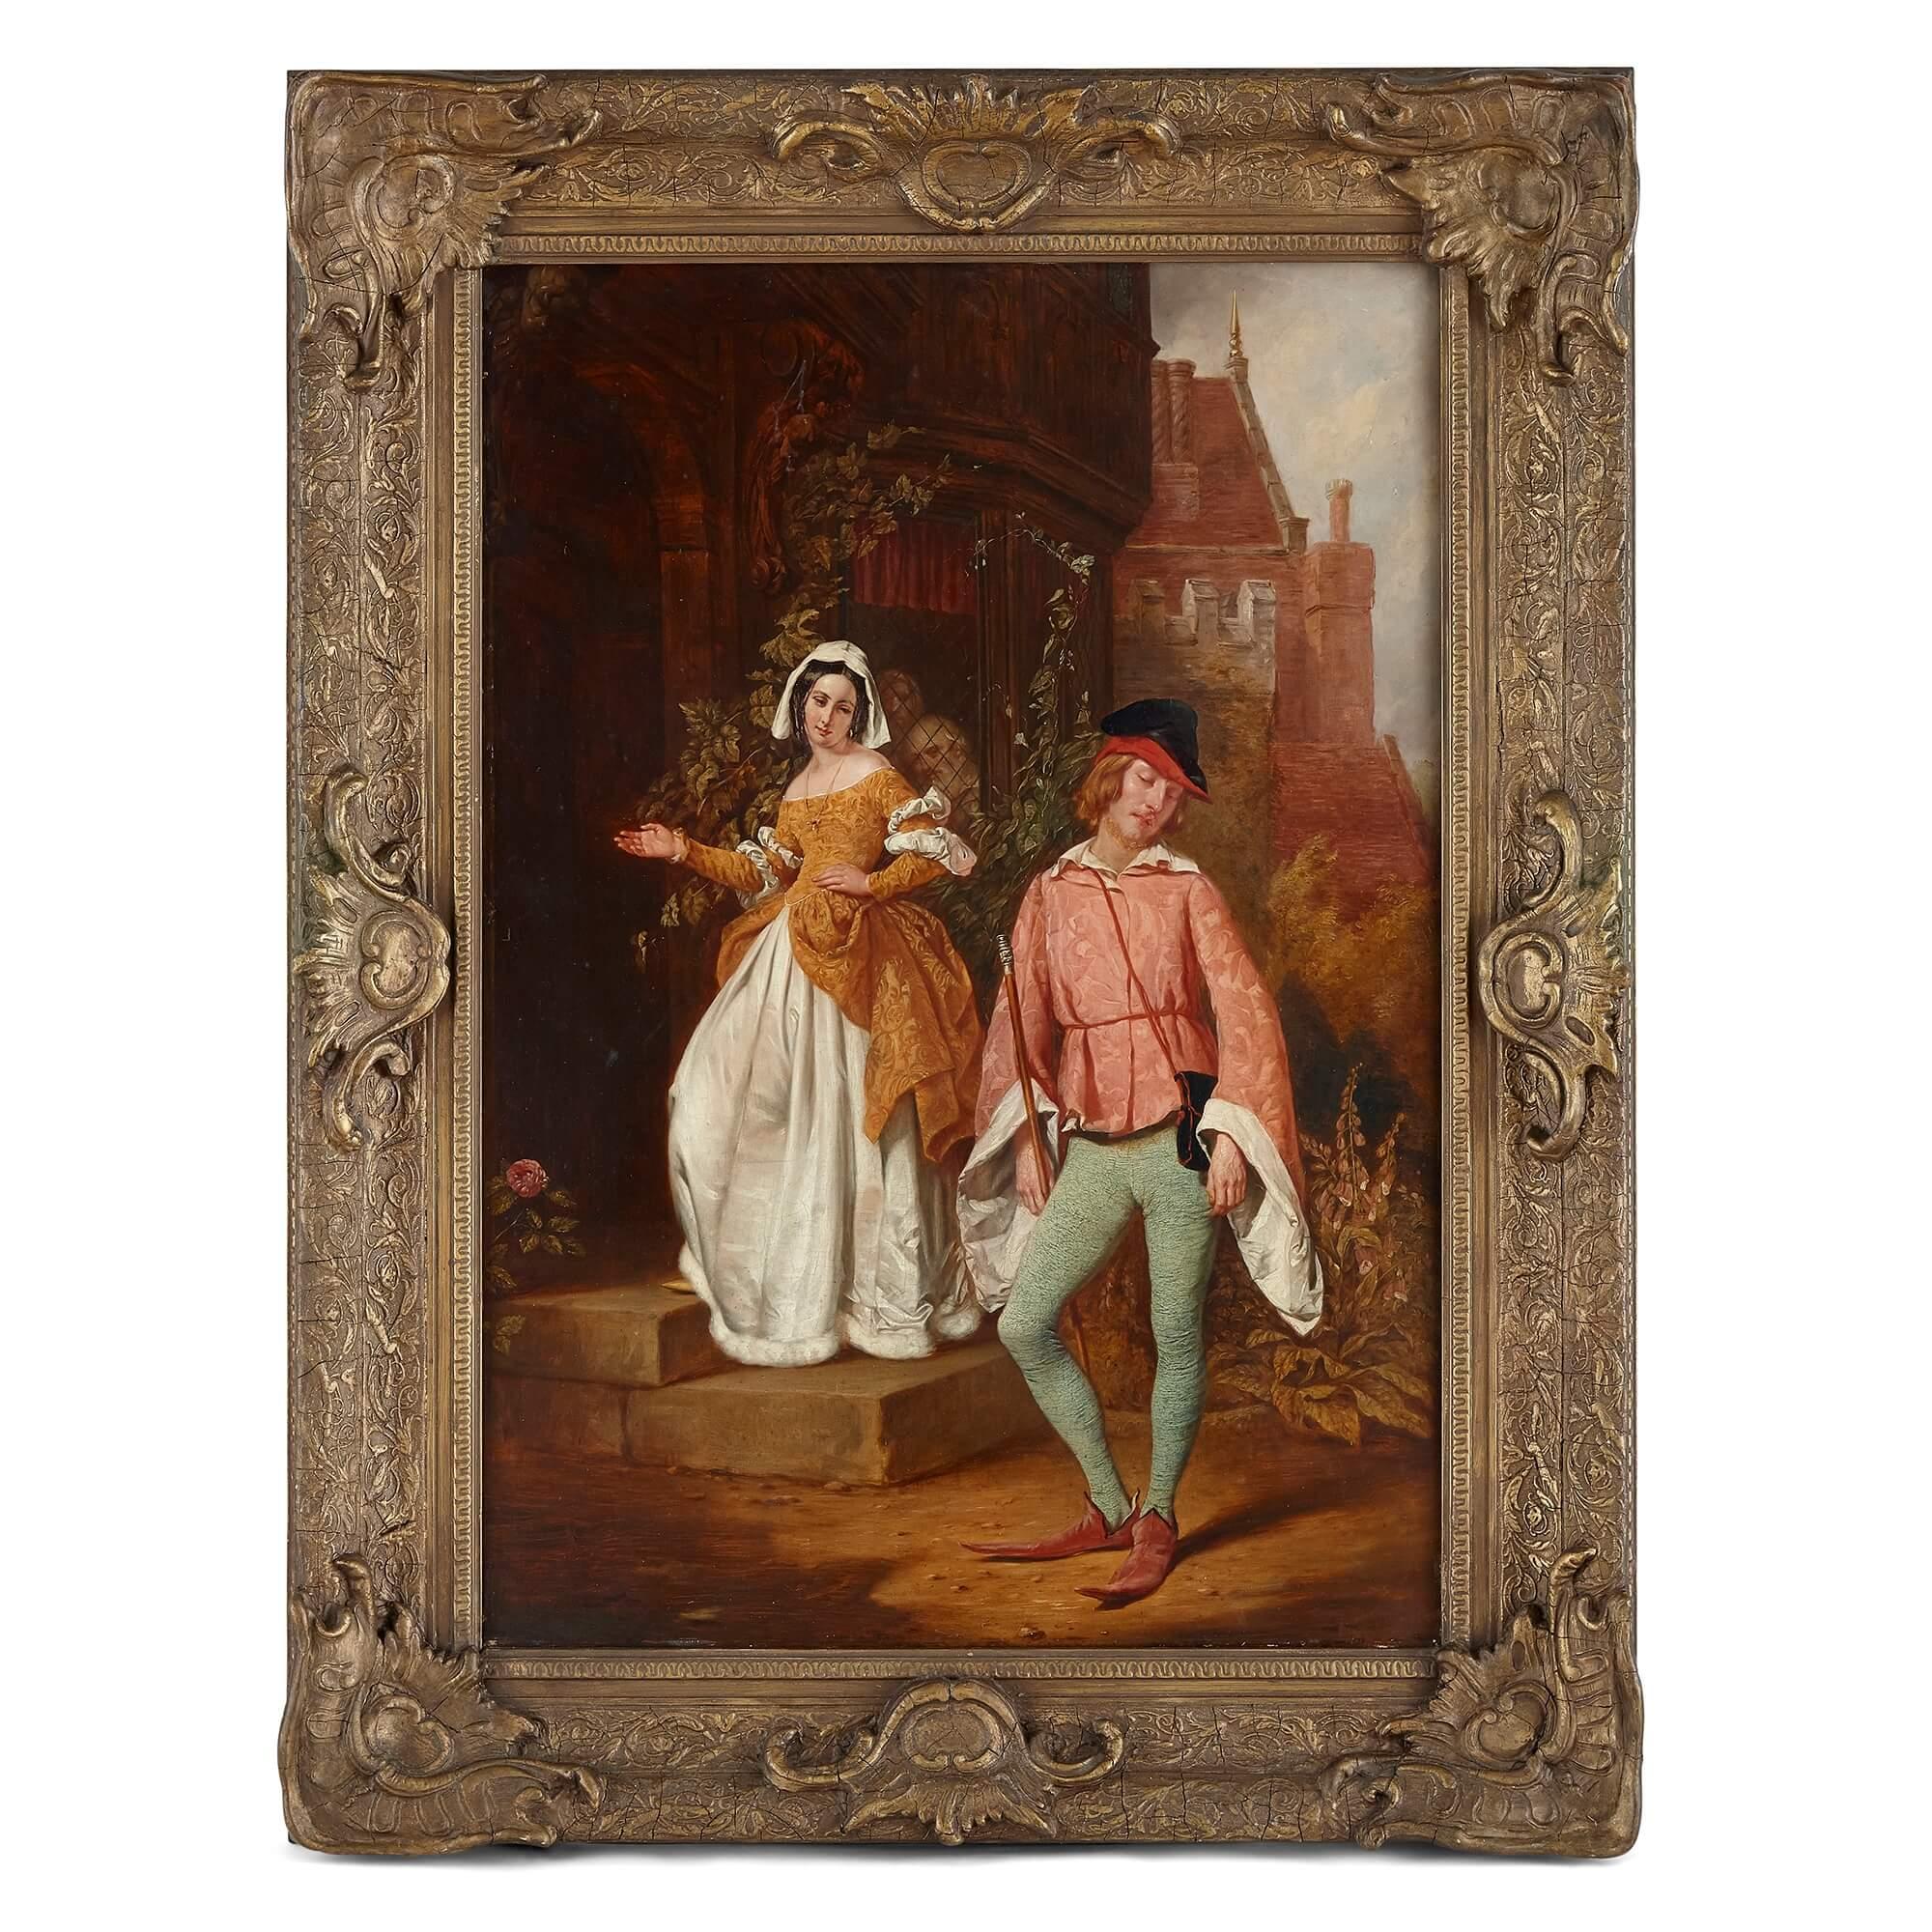 Painting of The Merry Wives of Windsor attributed to John Calcott Horsley